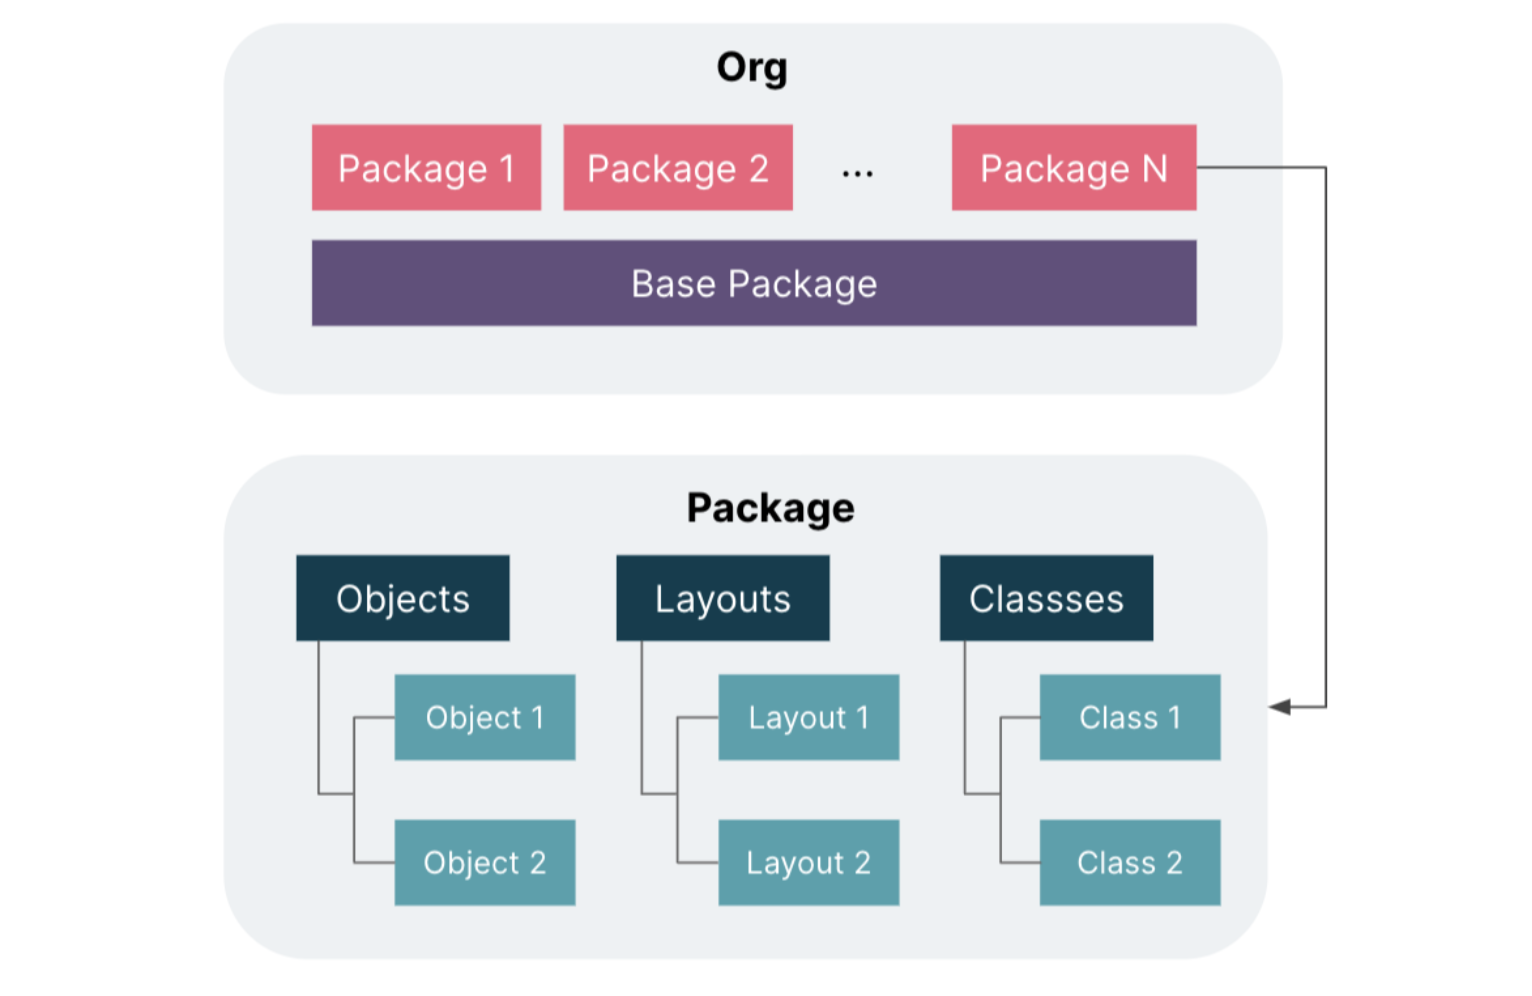 Metadata in the package-based model